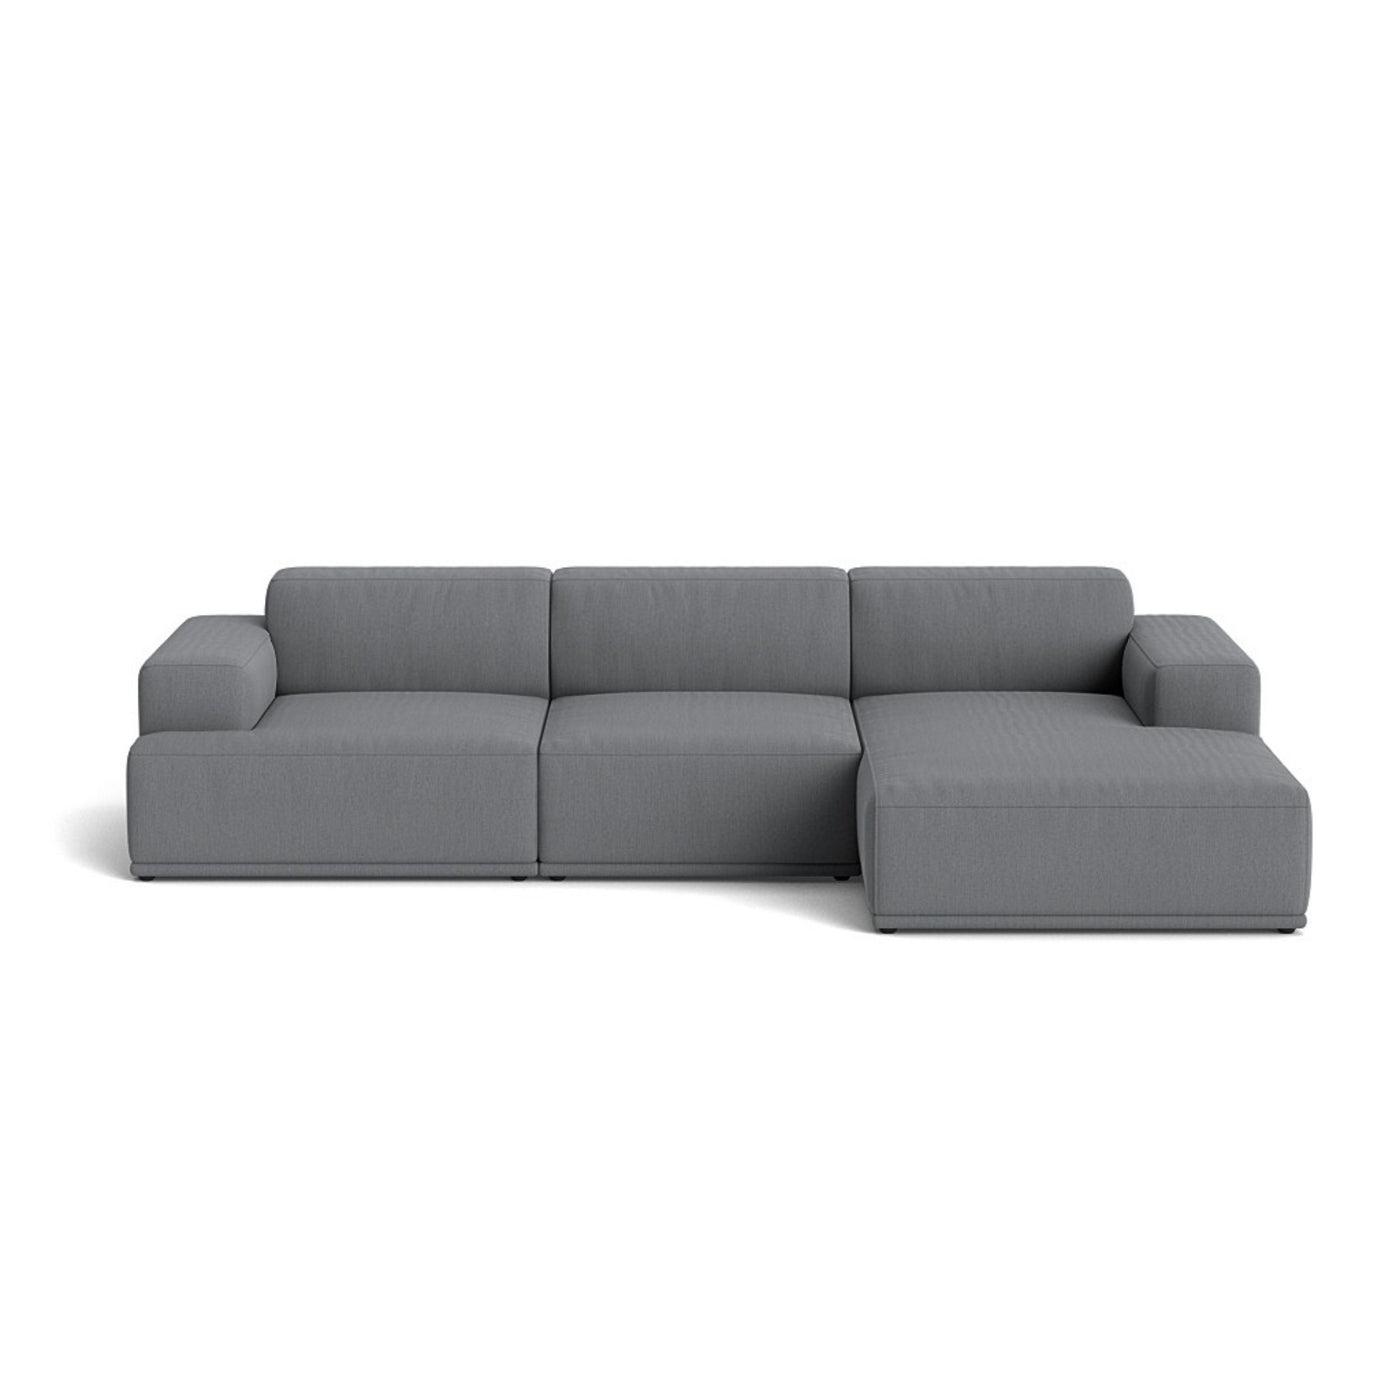 Muuto Connect Soft Modular 3 Seater Sofa, configuration 3. Made-to-order from someday designs. #colour_re-wool-158